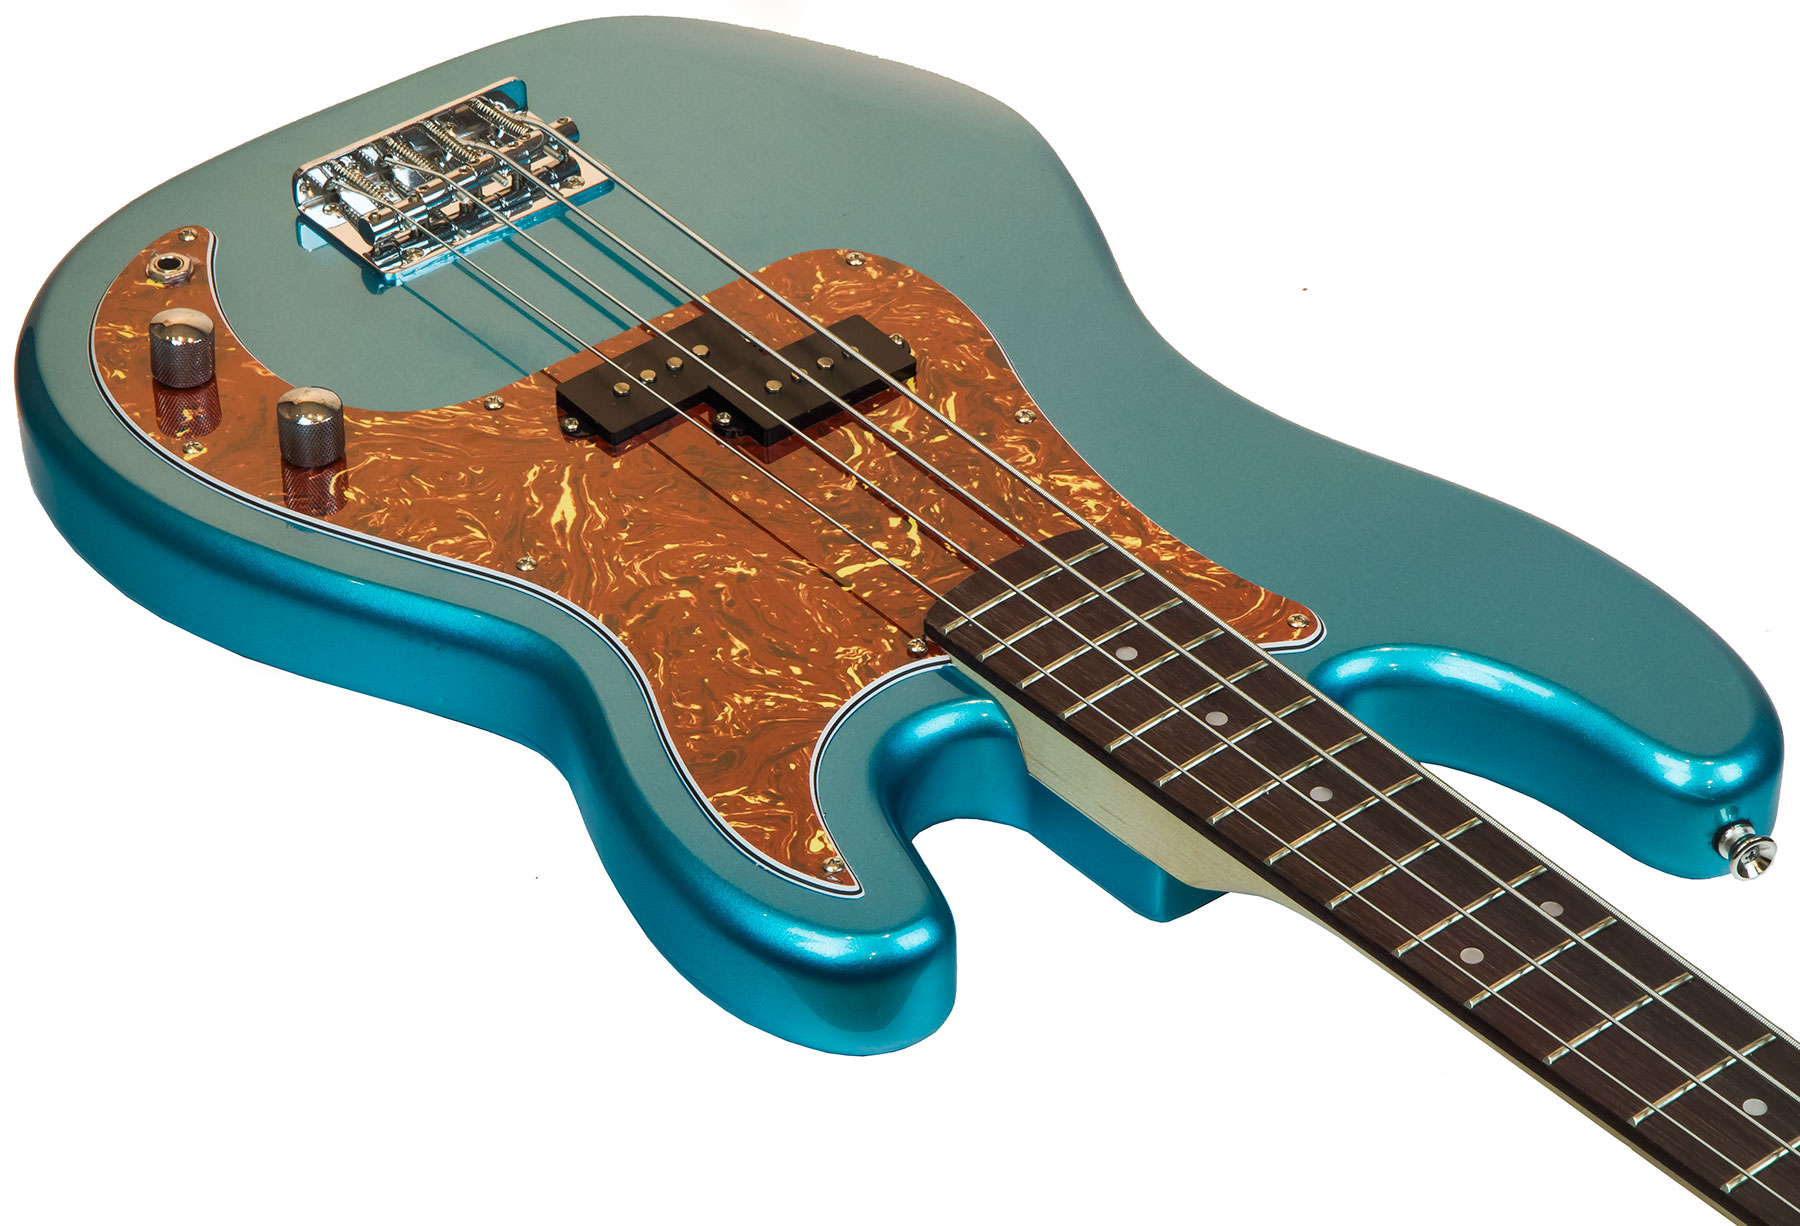 Eastone Prb Pur - Metallic Light Blue - Solid body electric bass - Variation 2